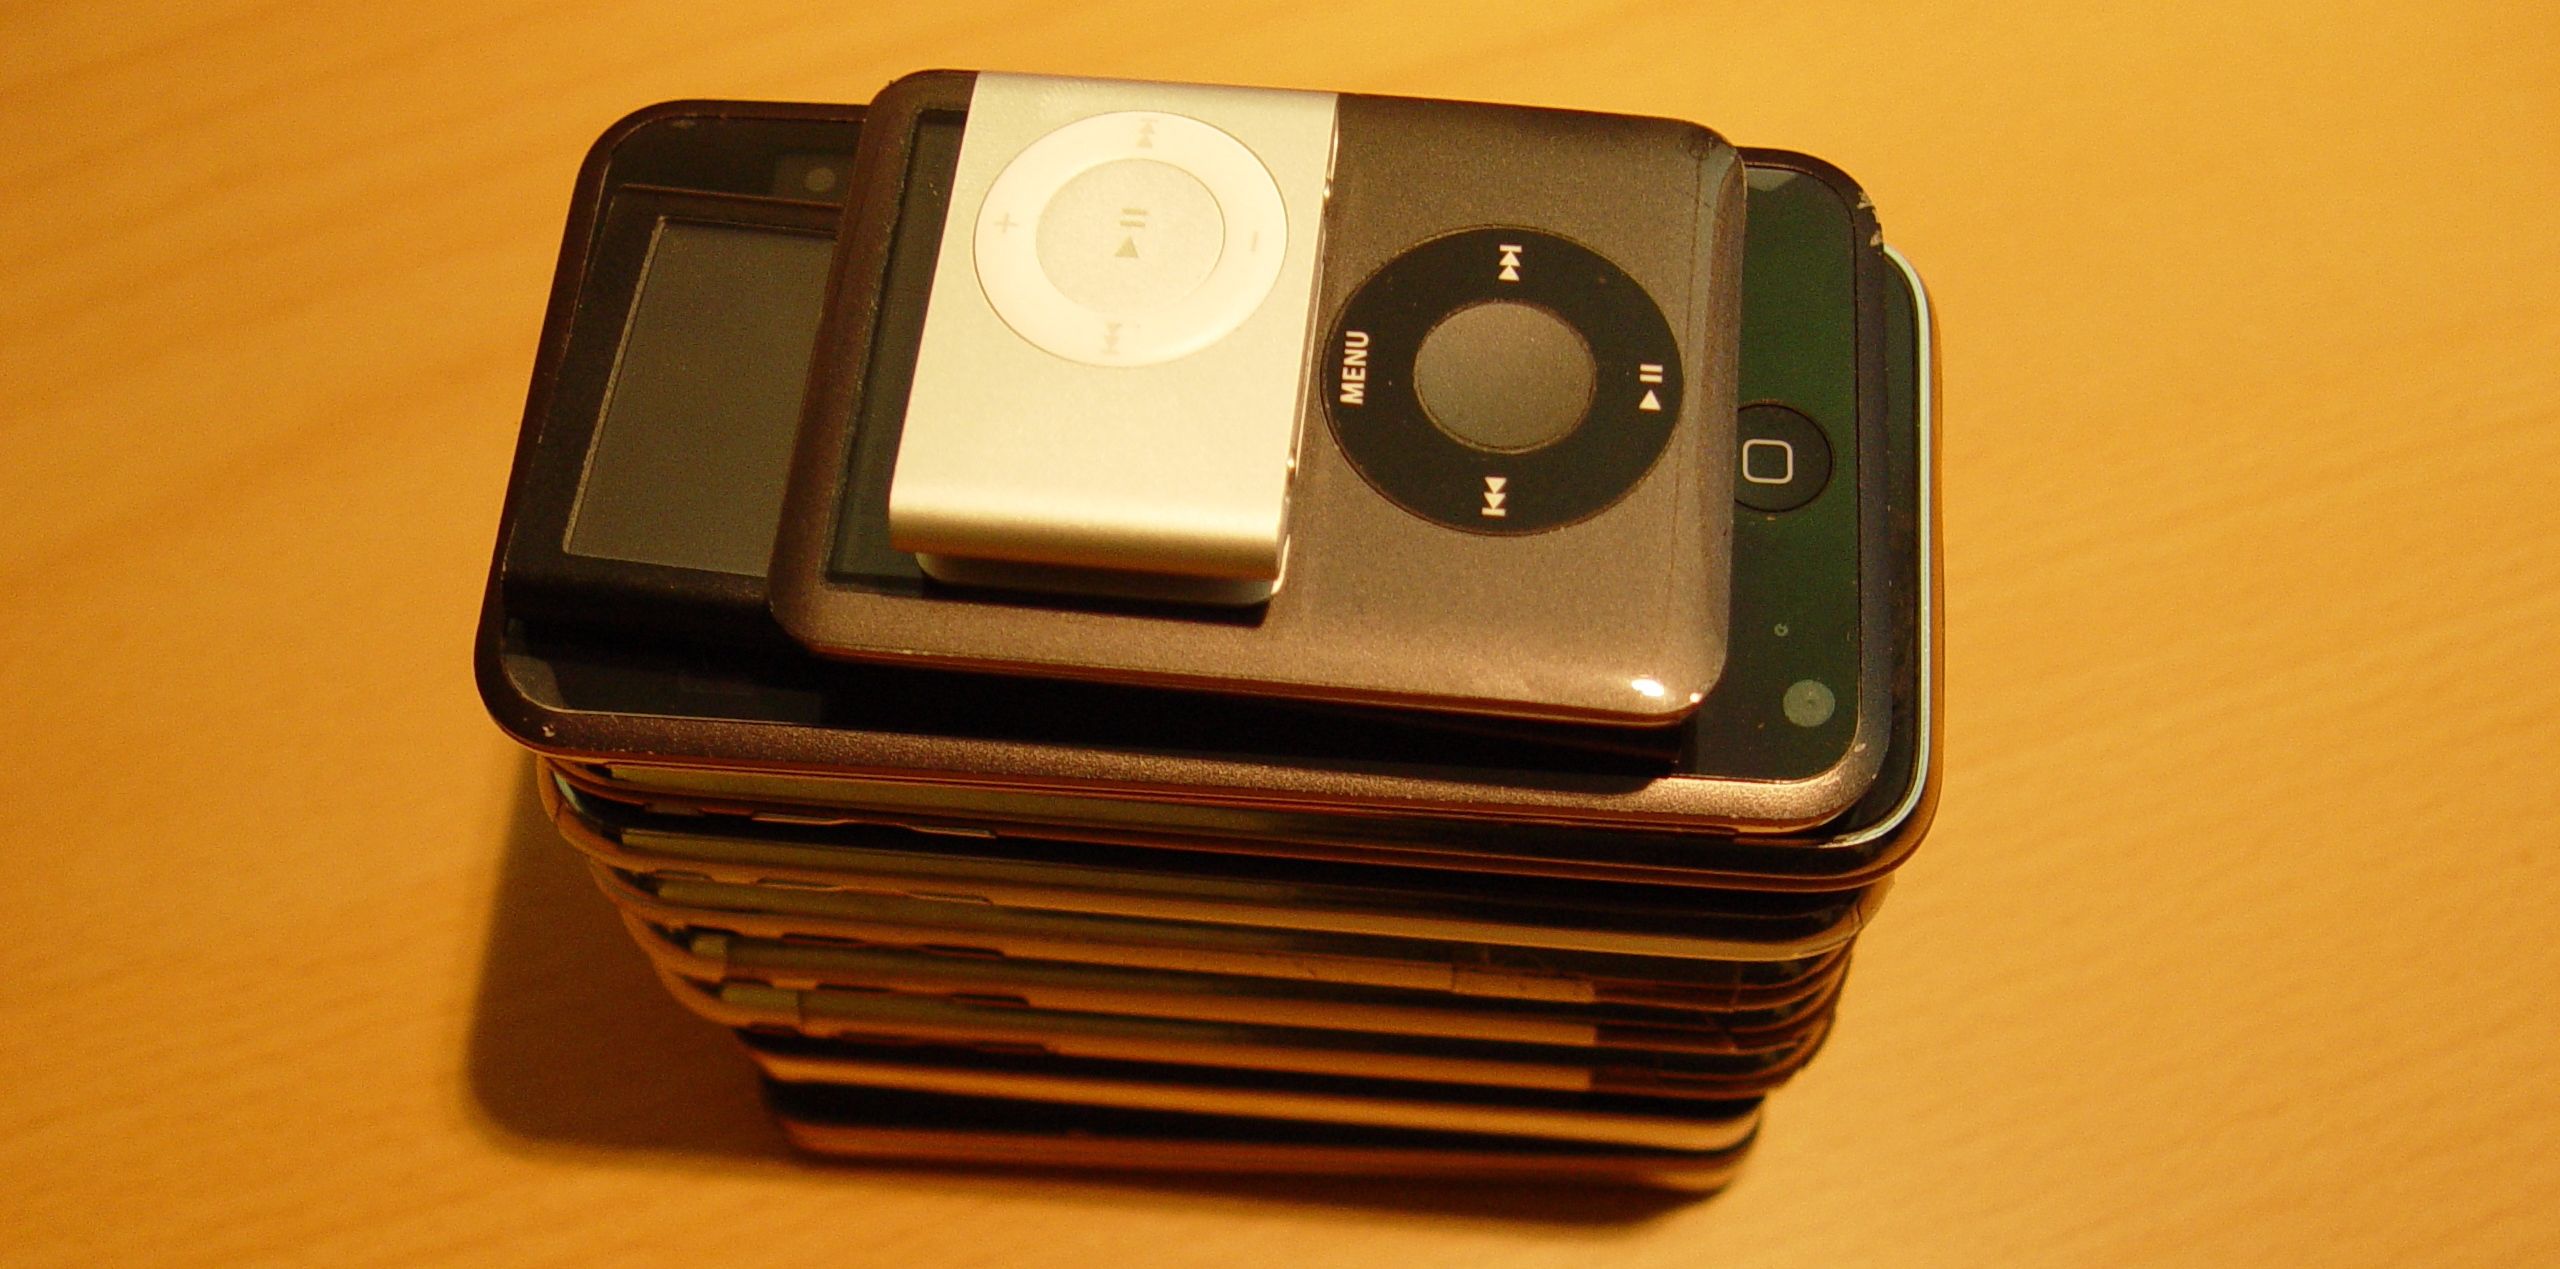 Stack of iPods on a table